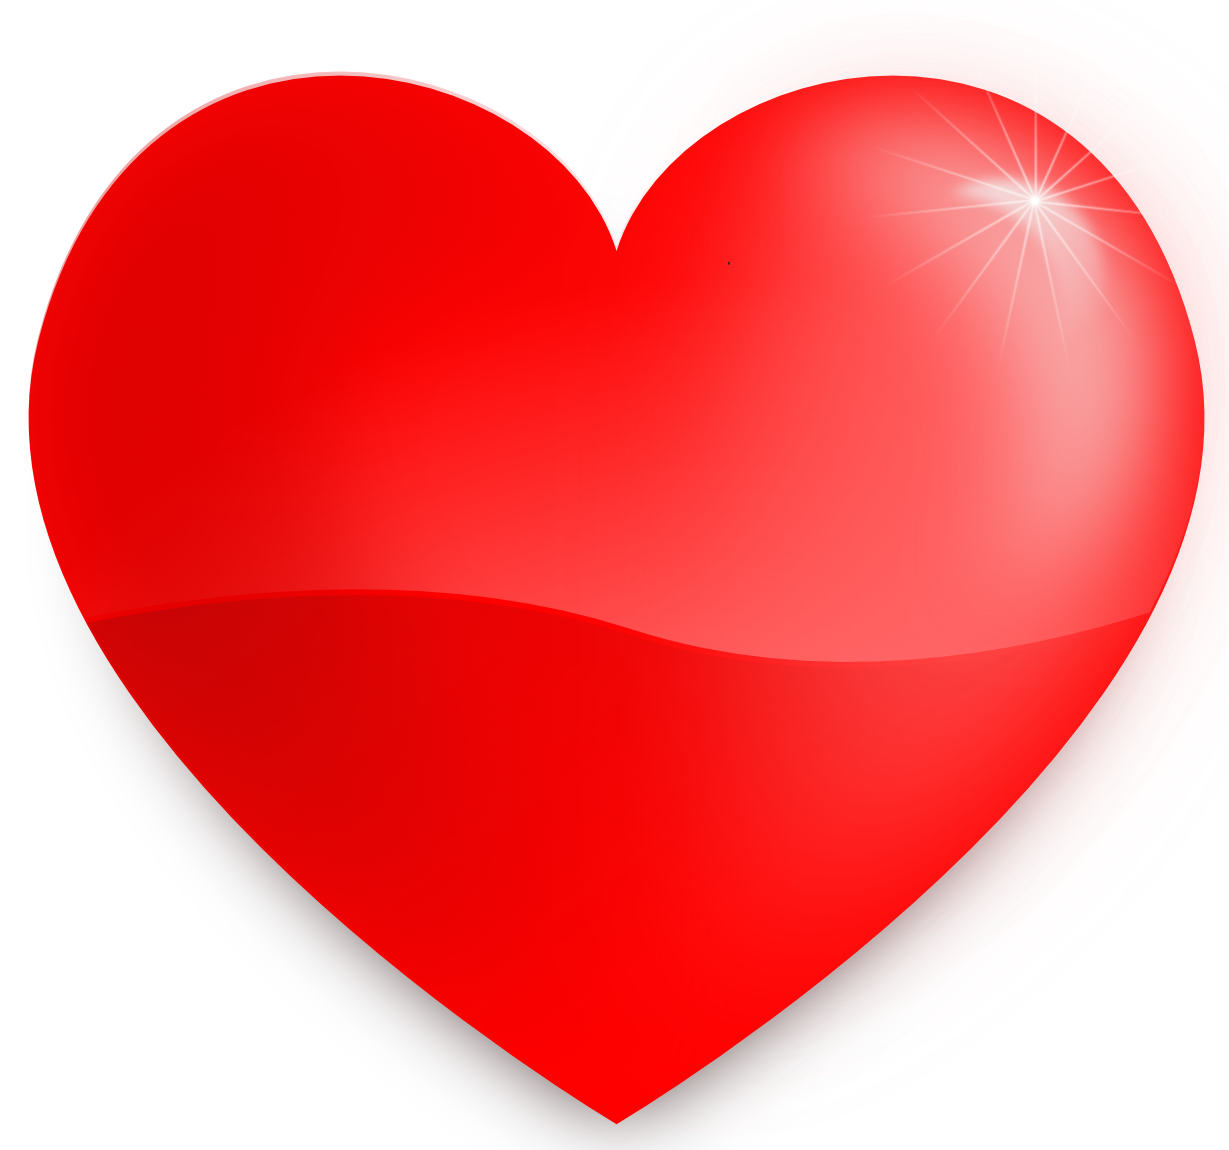 Valentines Day Heart PNG Background Image